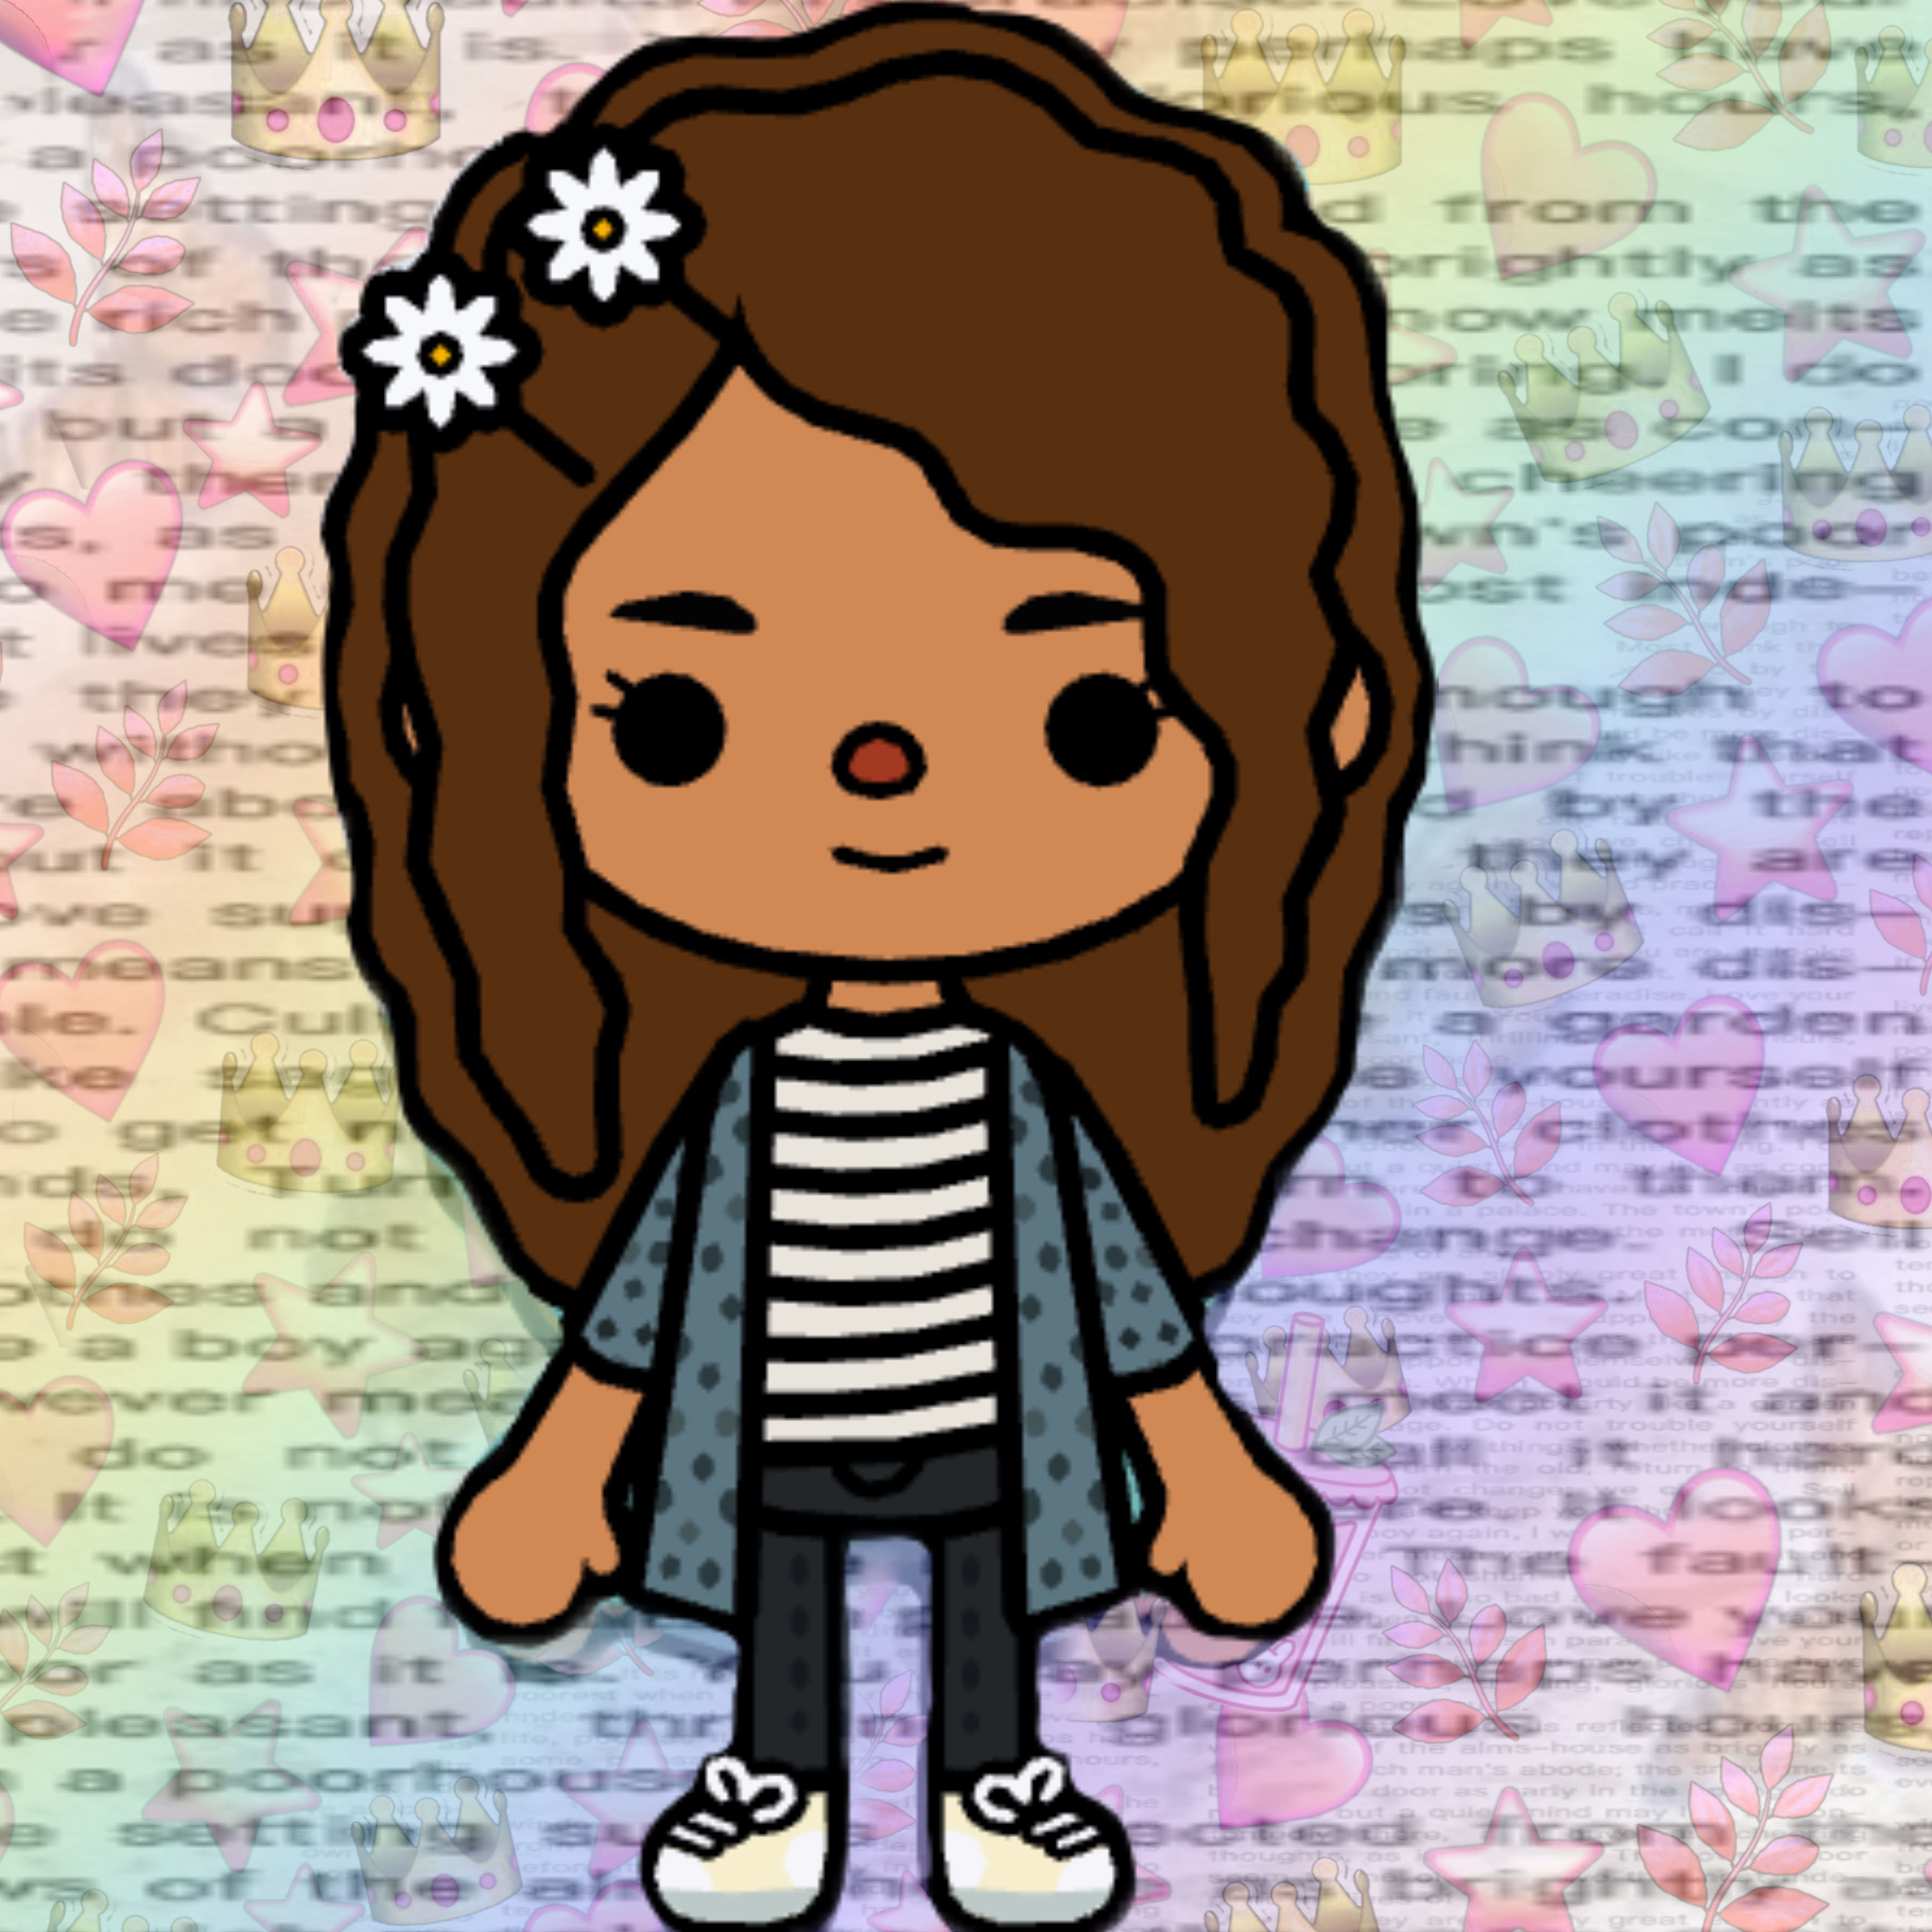 A cartoon girl with brown hair and glasses - Toca Boca